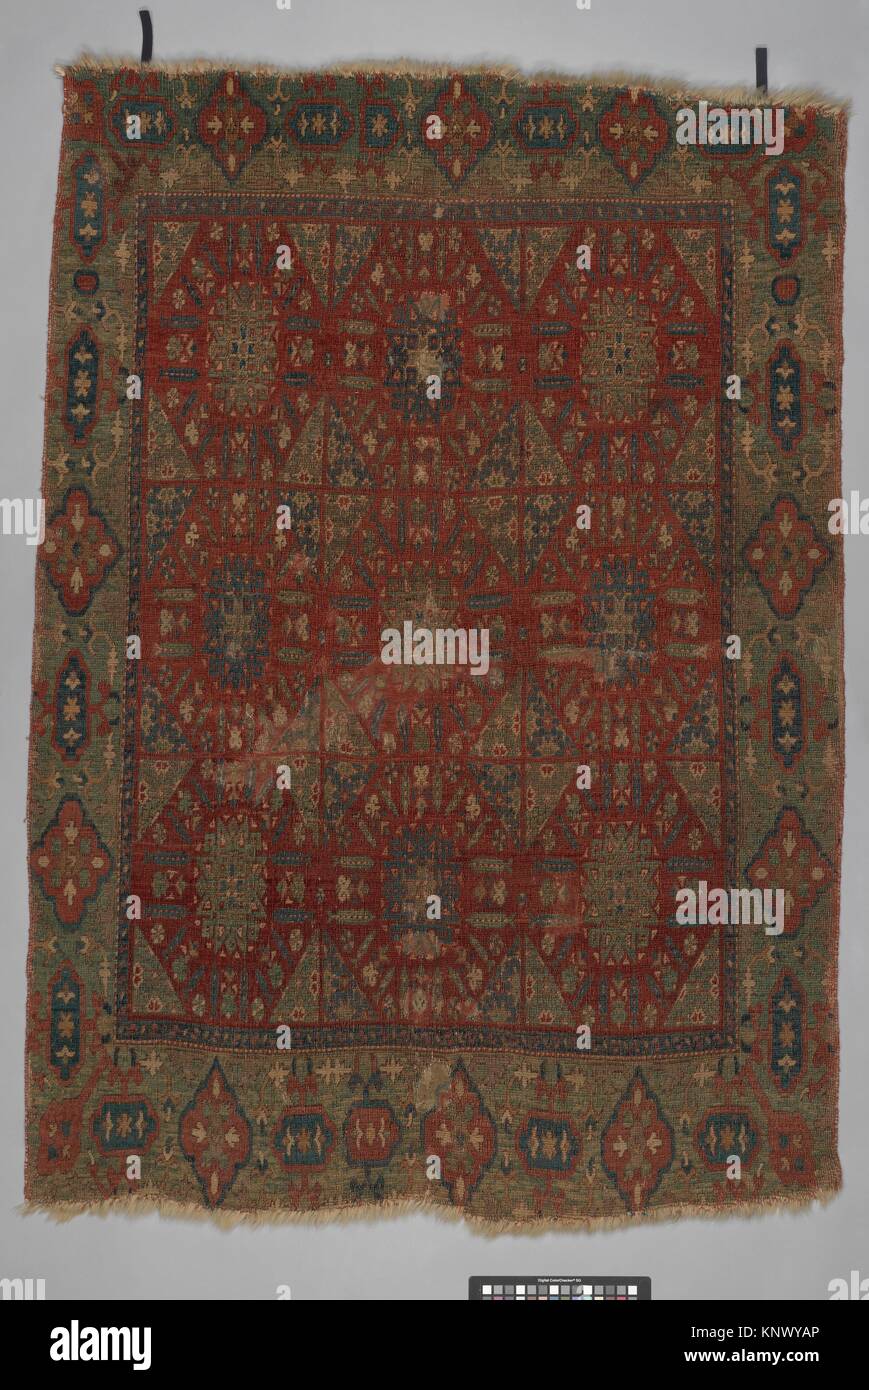 ´Chessboard´ Carpet. Object Name: Carpet; Date: late 16th-early 17th century; Geography: Attributed to probably Syria; Medium: Animal hair (warp and Stock Photo